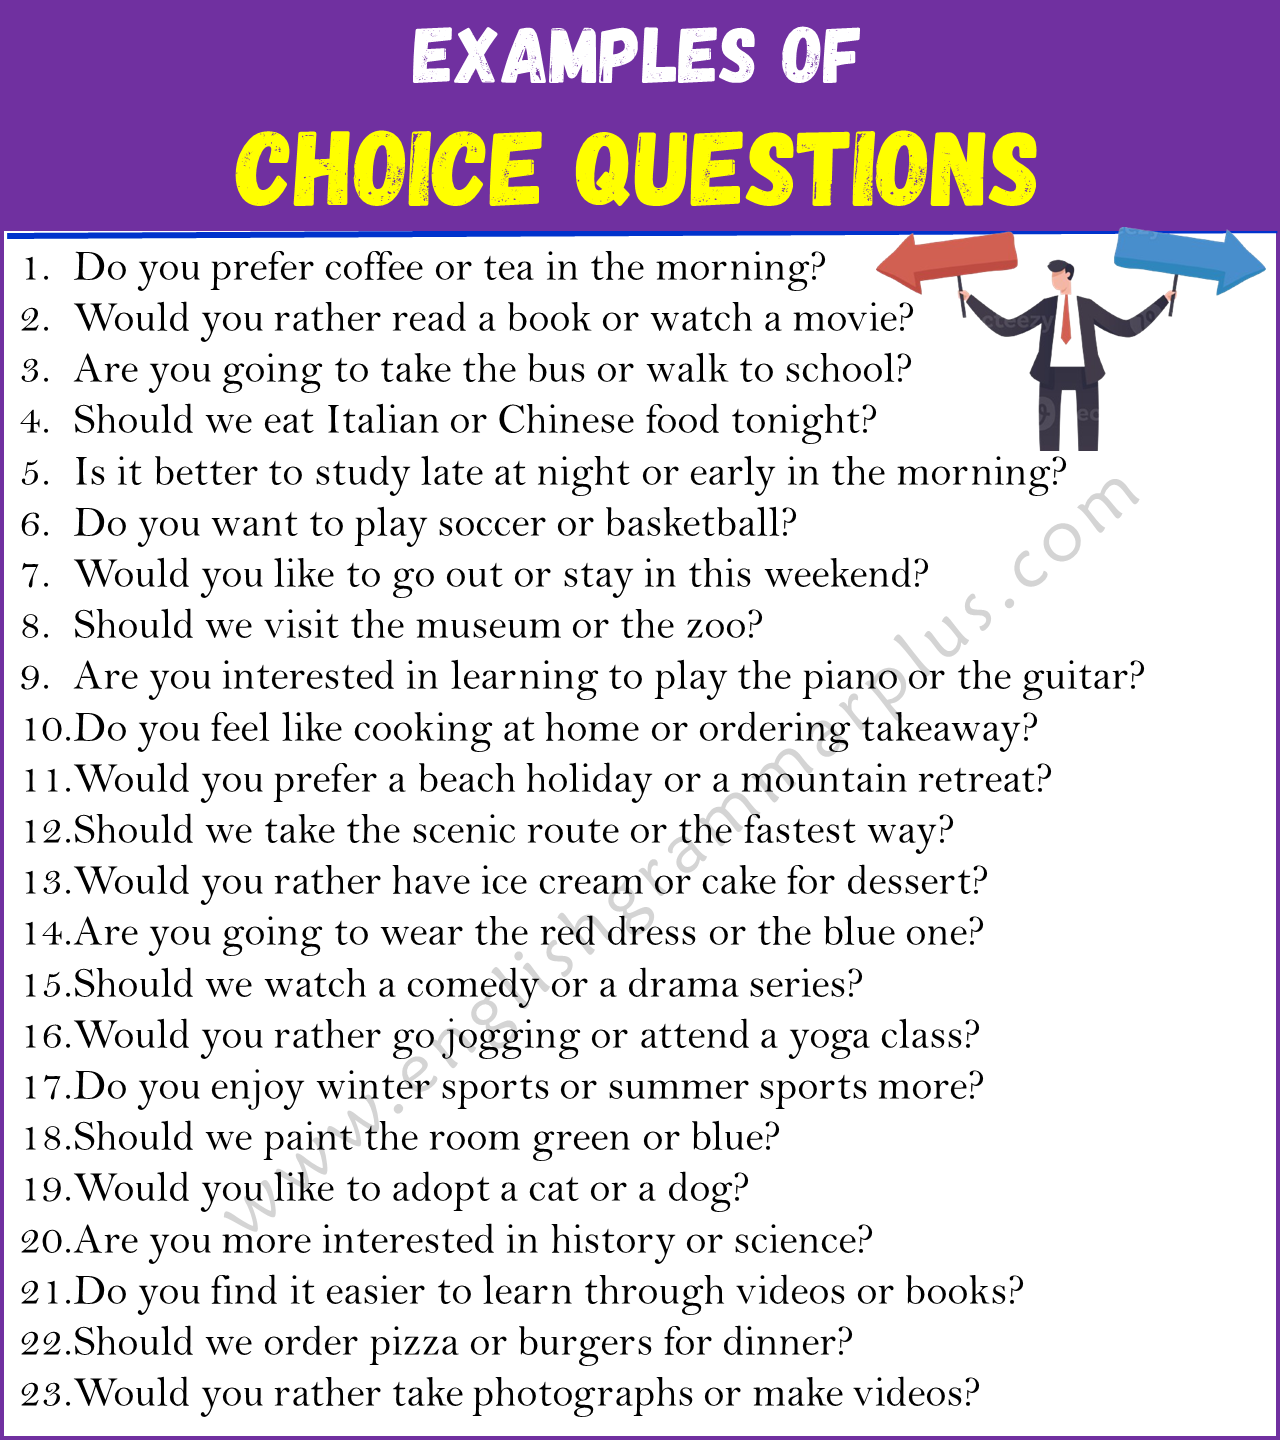 Examples of Choice Questions in English